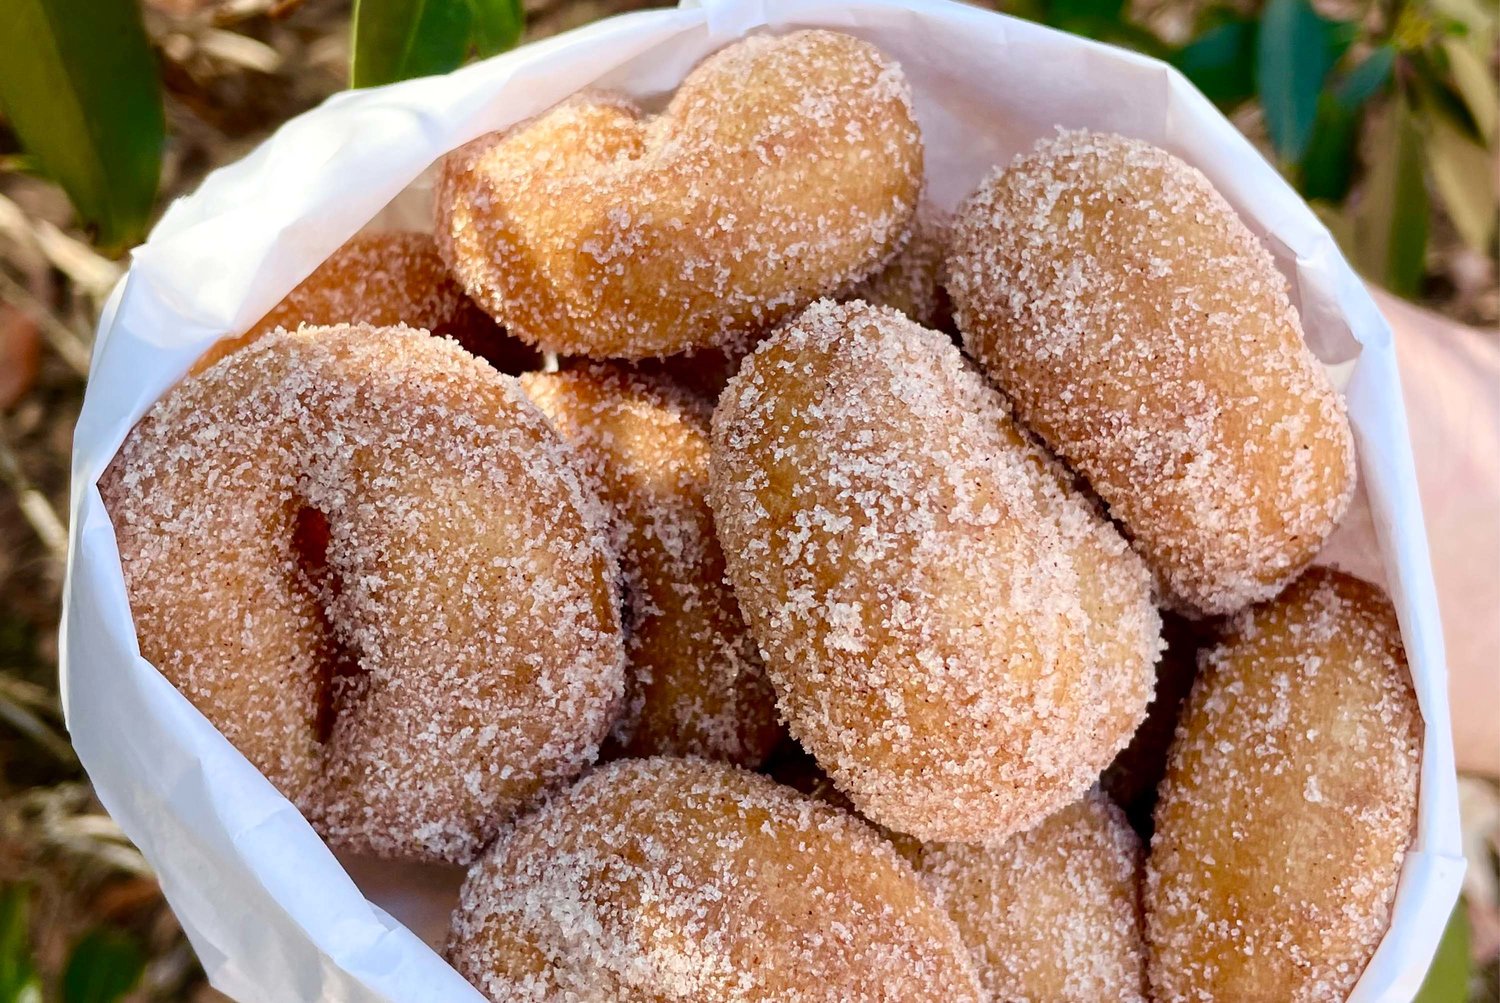 Mini-donuts fresh out of the fryer from Black Dog Donuts